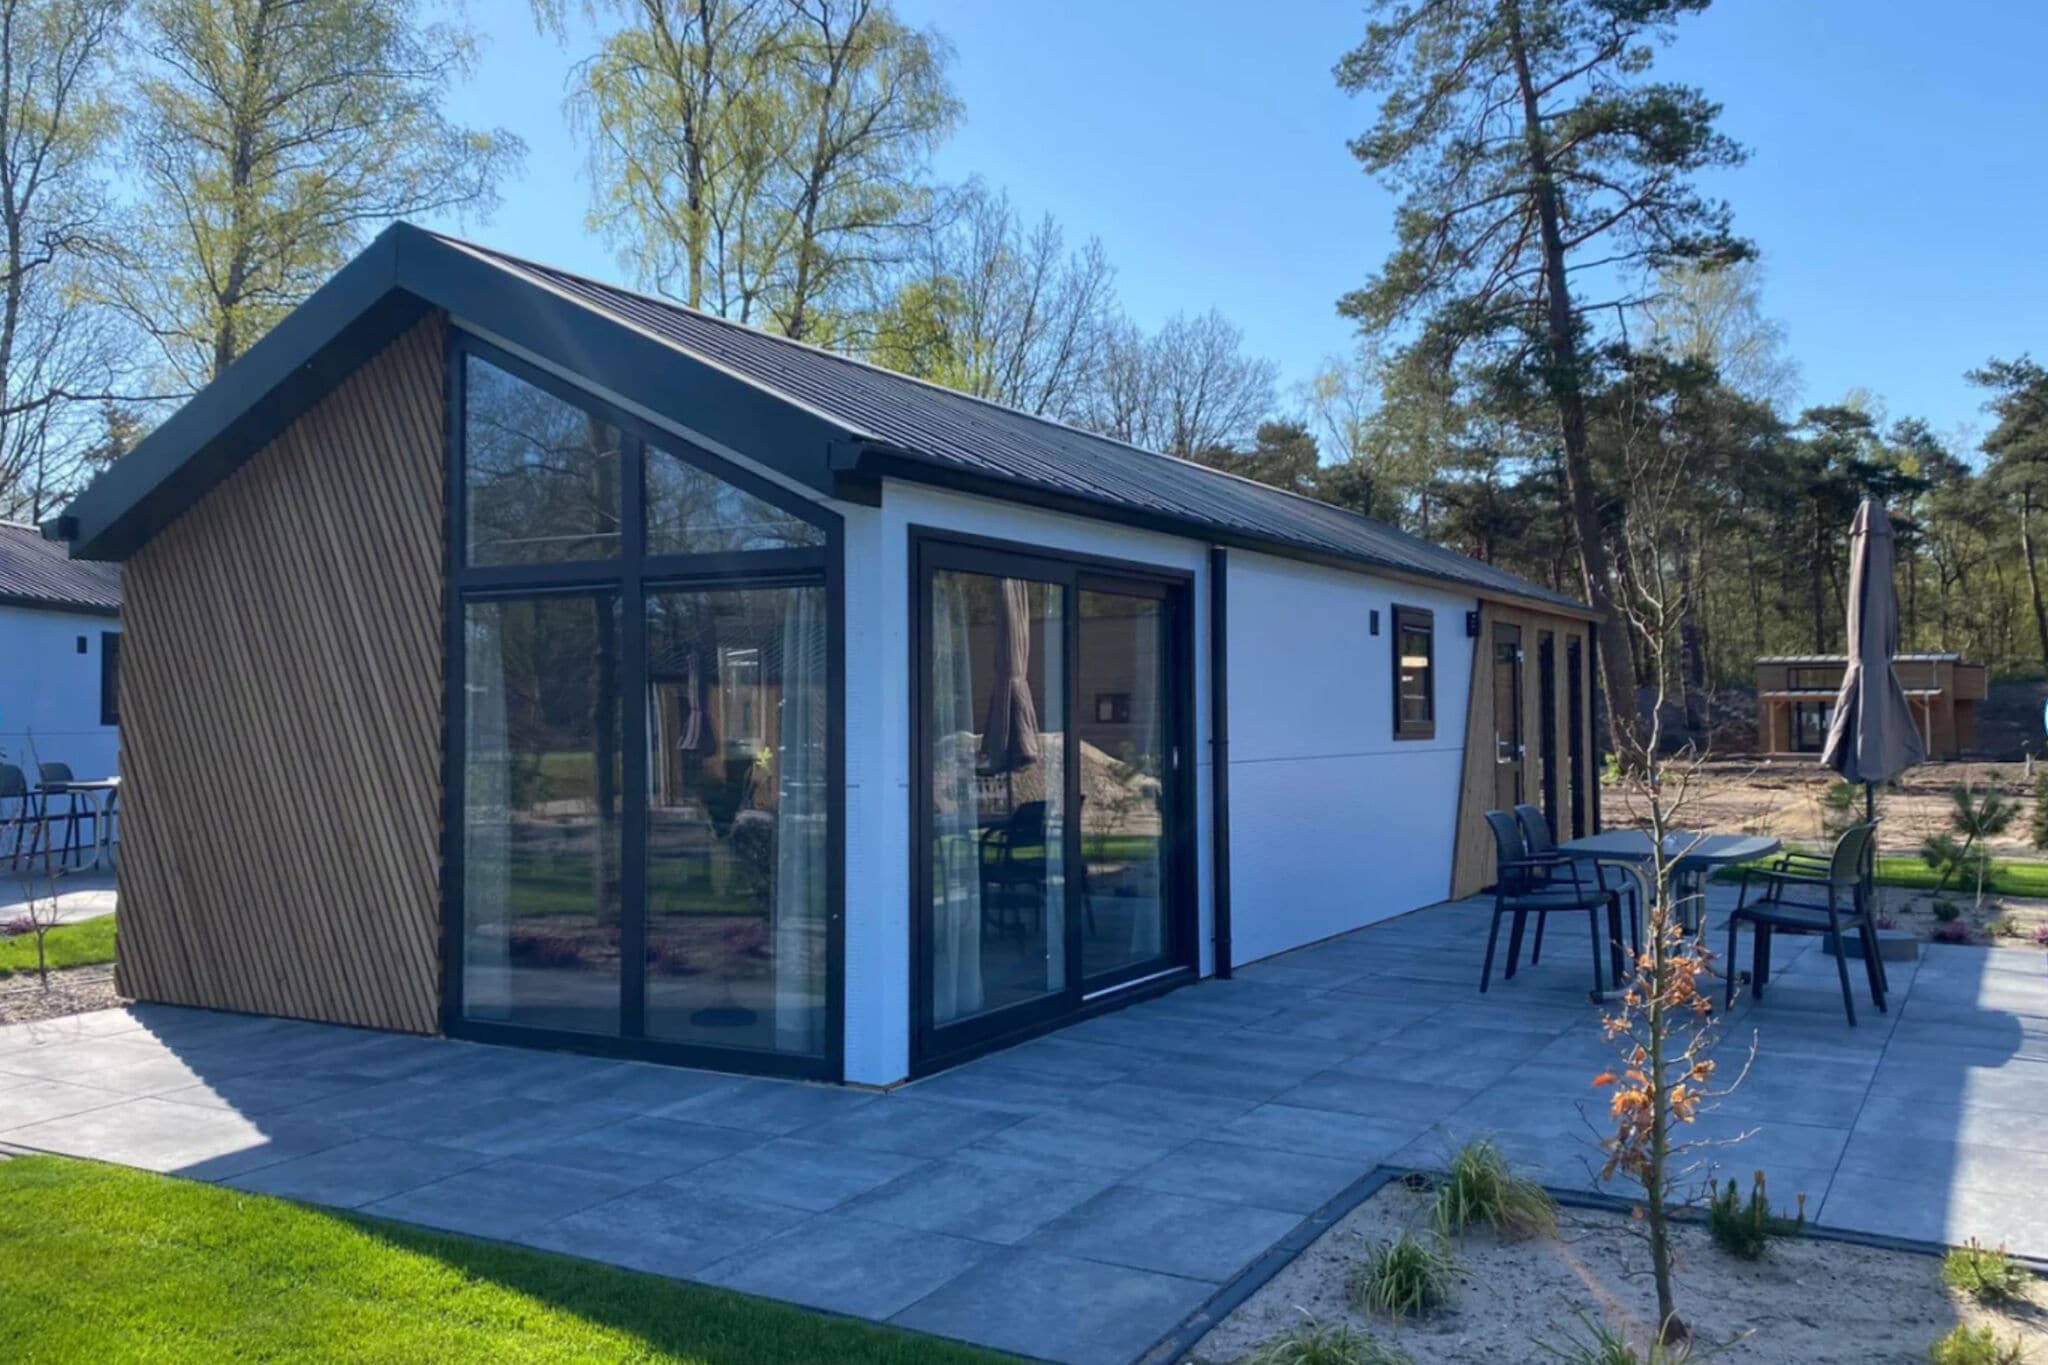 Nice chalet in a holiday park, adjacent to the Hoge Veluwe National Park